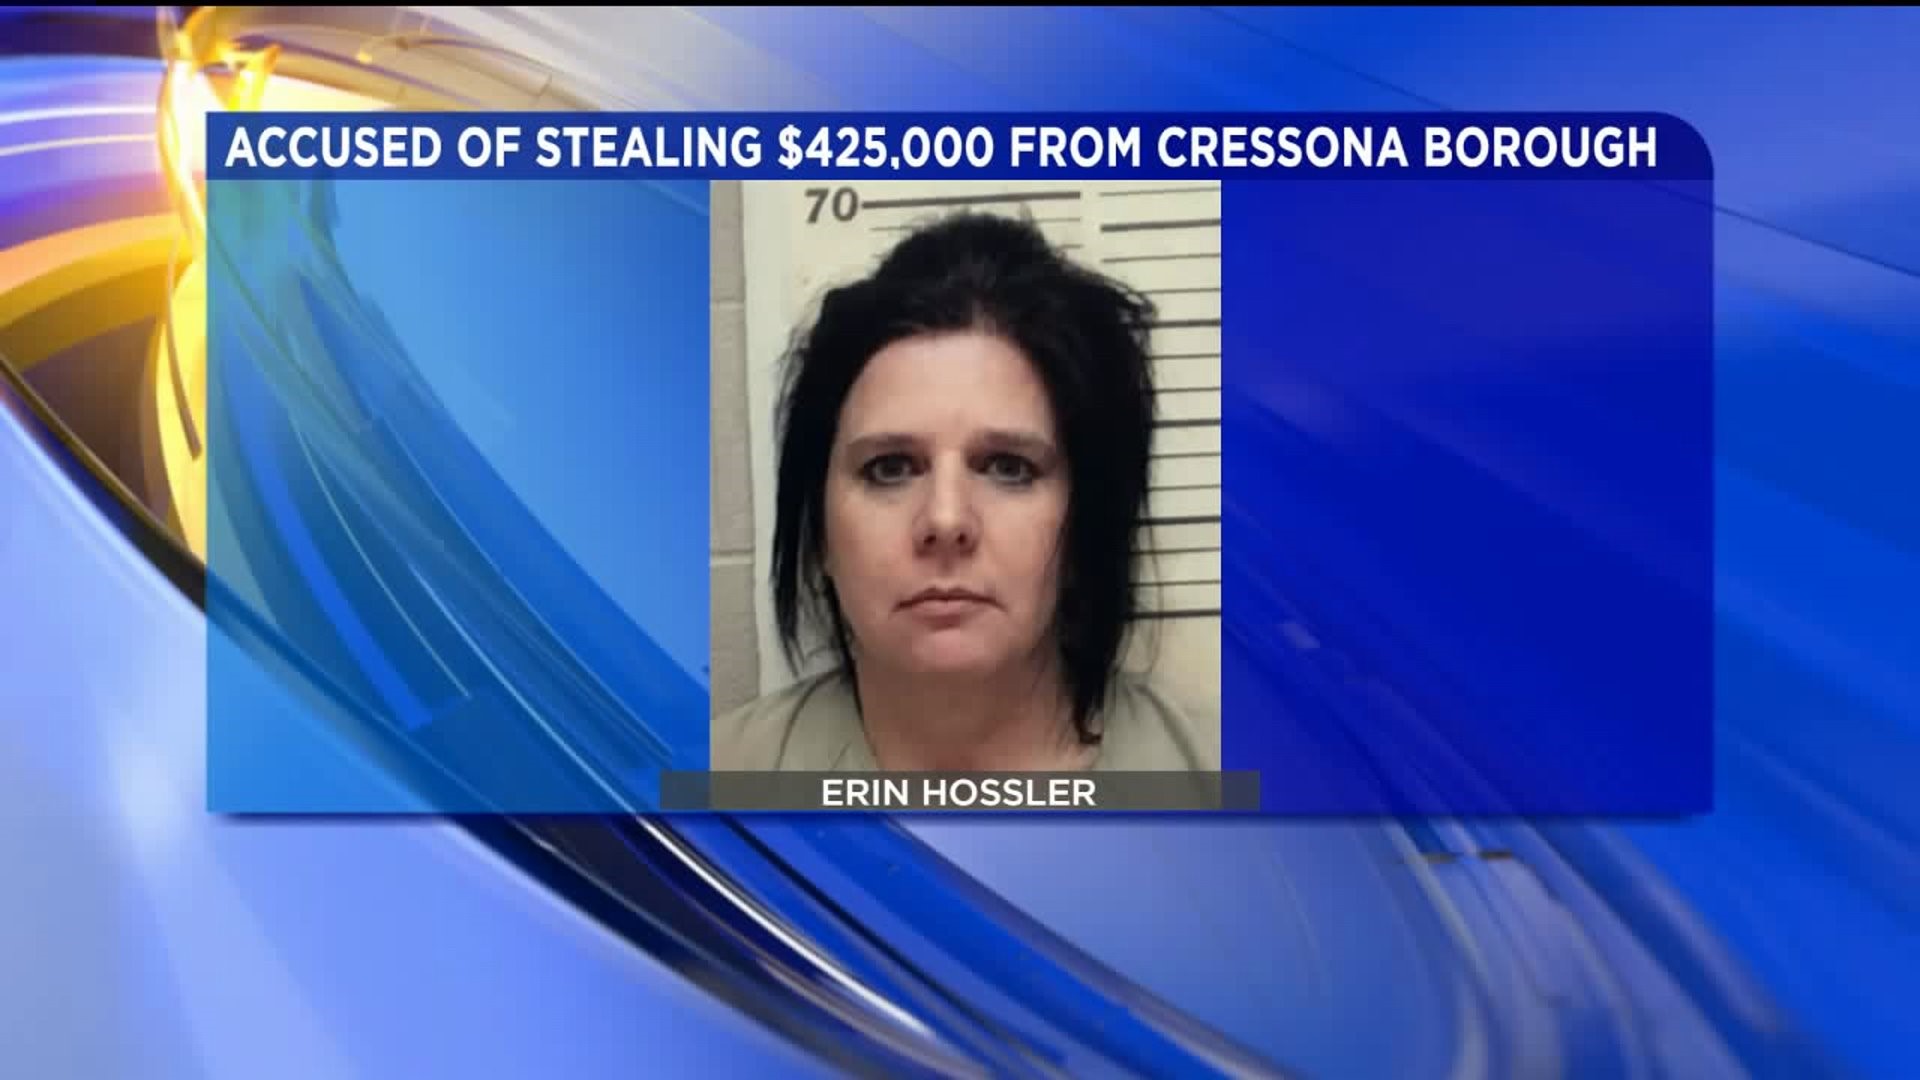 Cressona Borough Secretary Accused of Stealing Nearly Half a Million Dollars from Borough